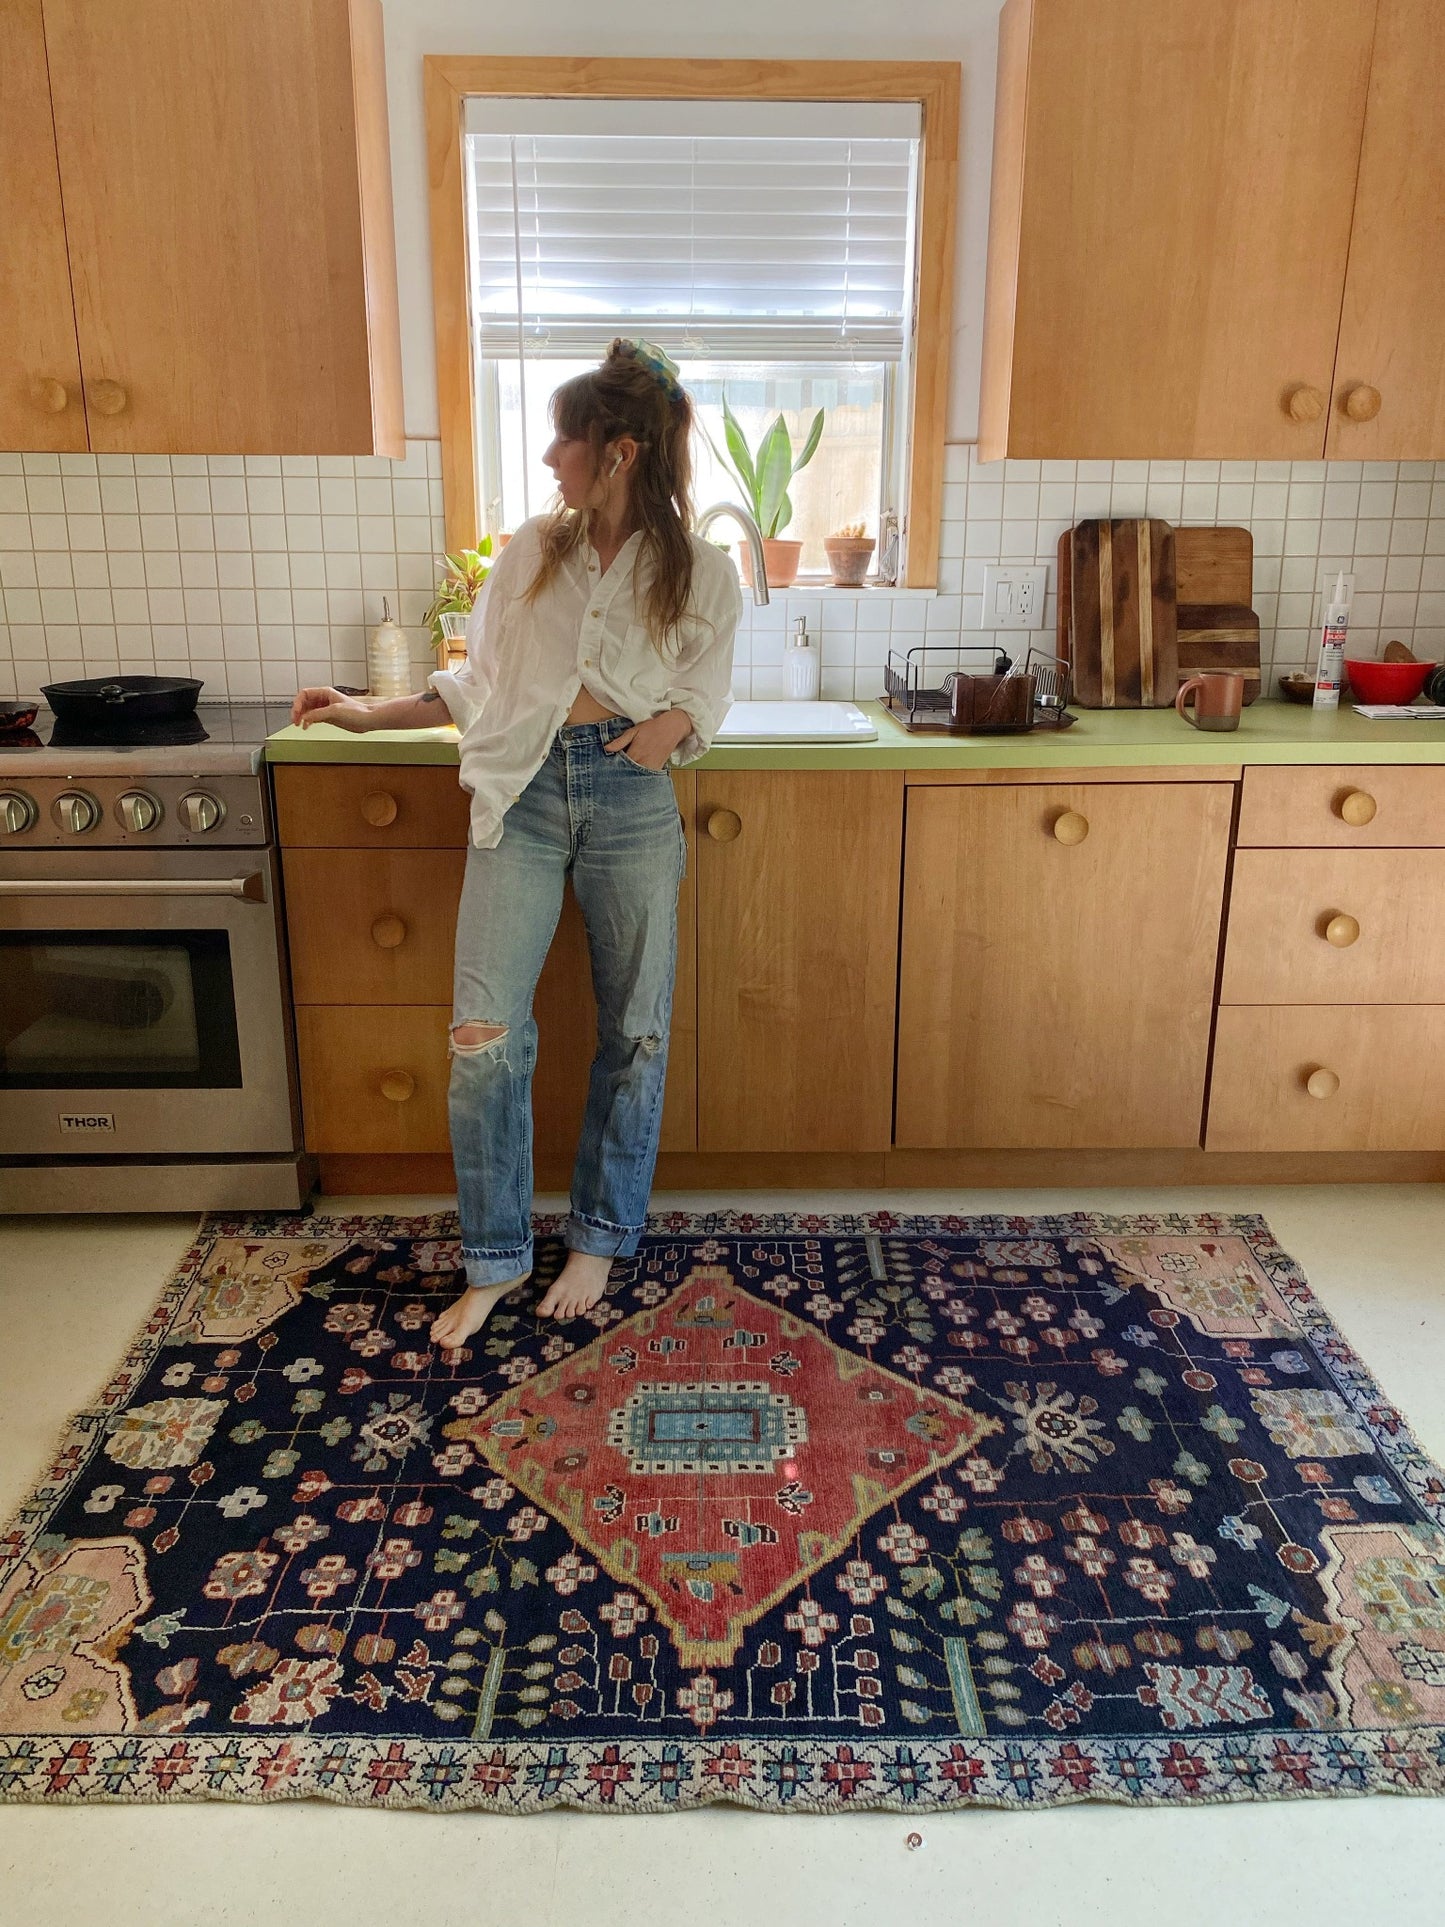 See Vintage Indigo Persian Rug Styled as a Kitchen Focal Point